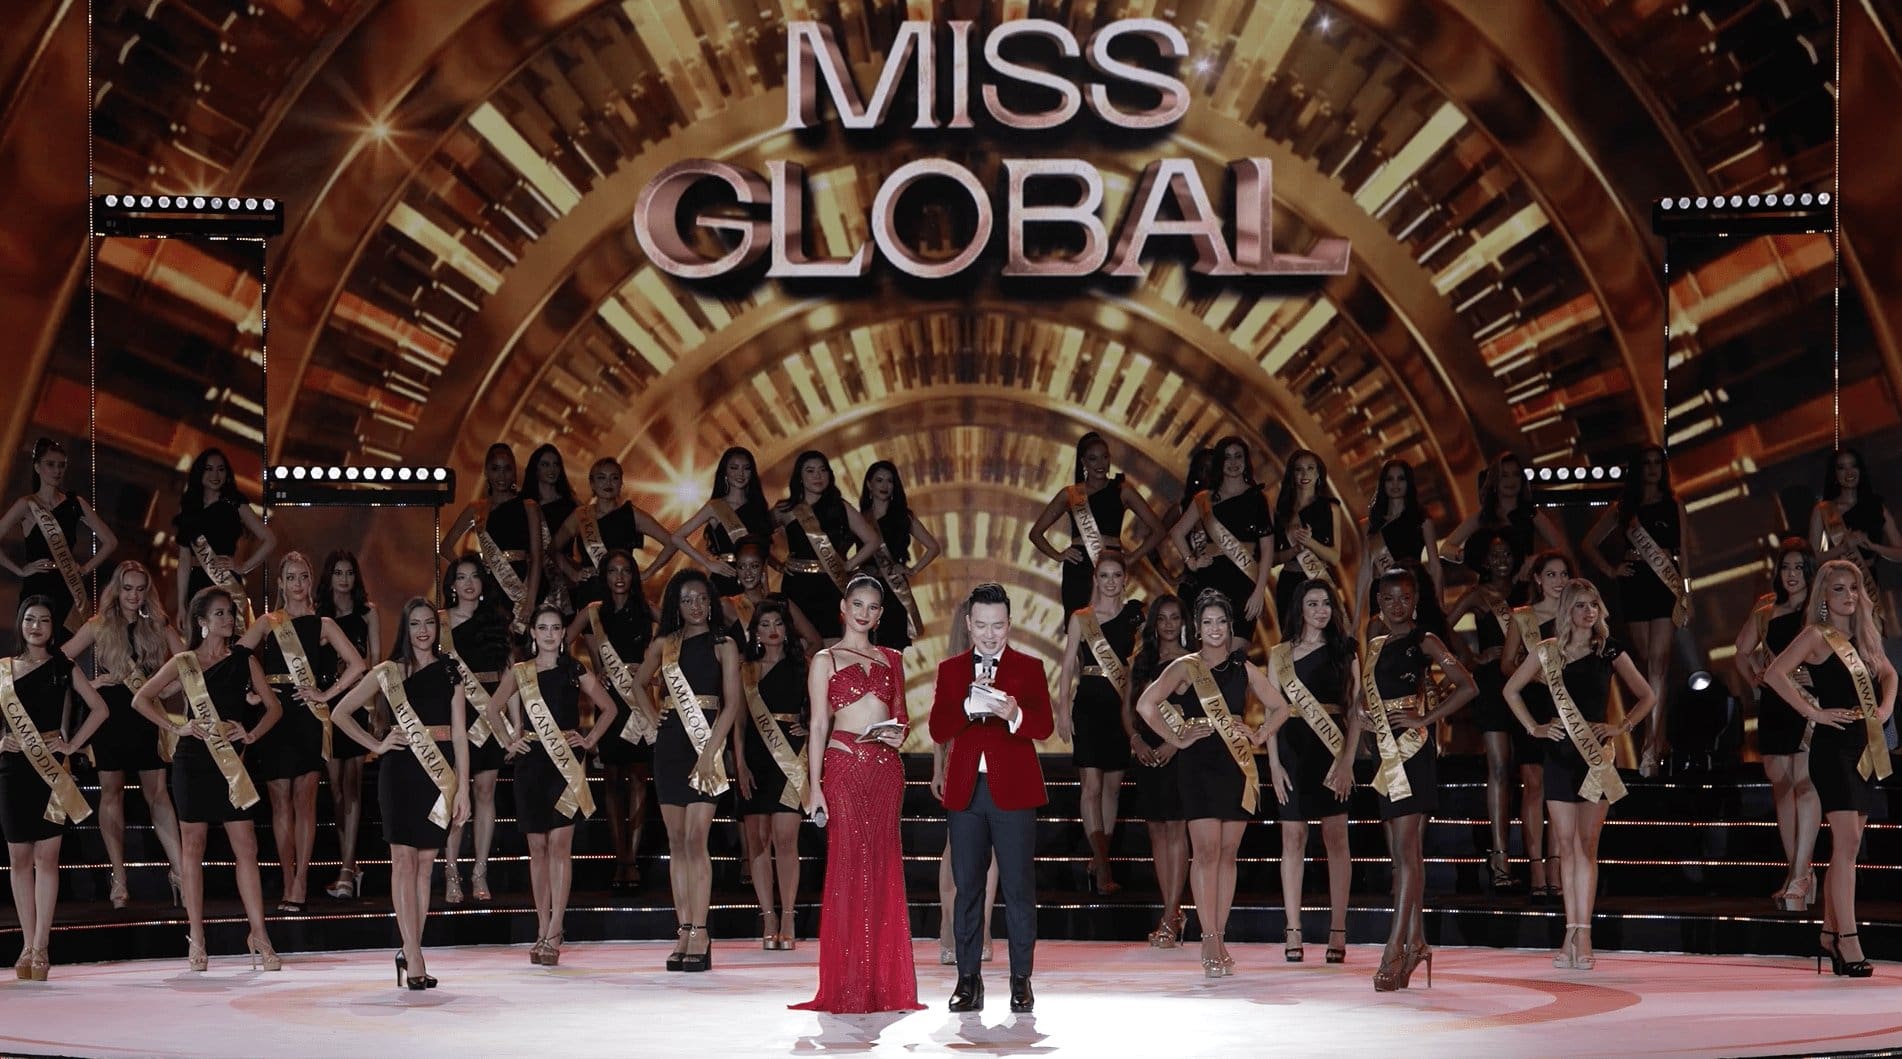 Contestants in sashes stand on stage at the miss global beauty pageant, with a host speaking into a microphone, all under a grand, illuminated archway.